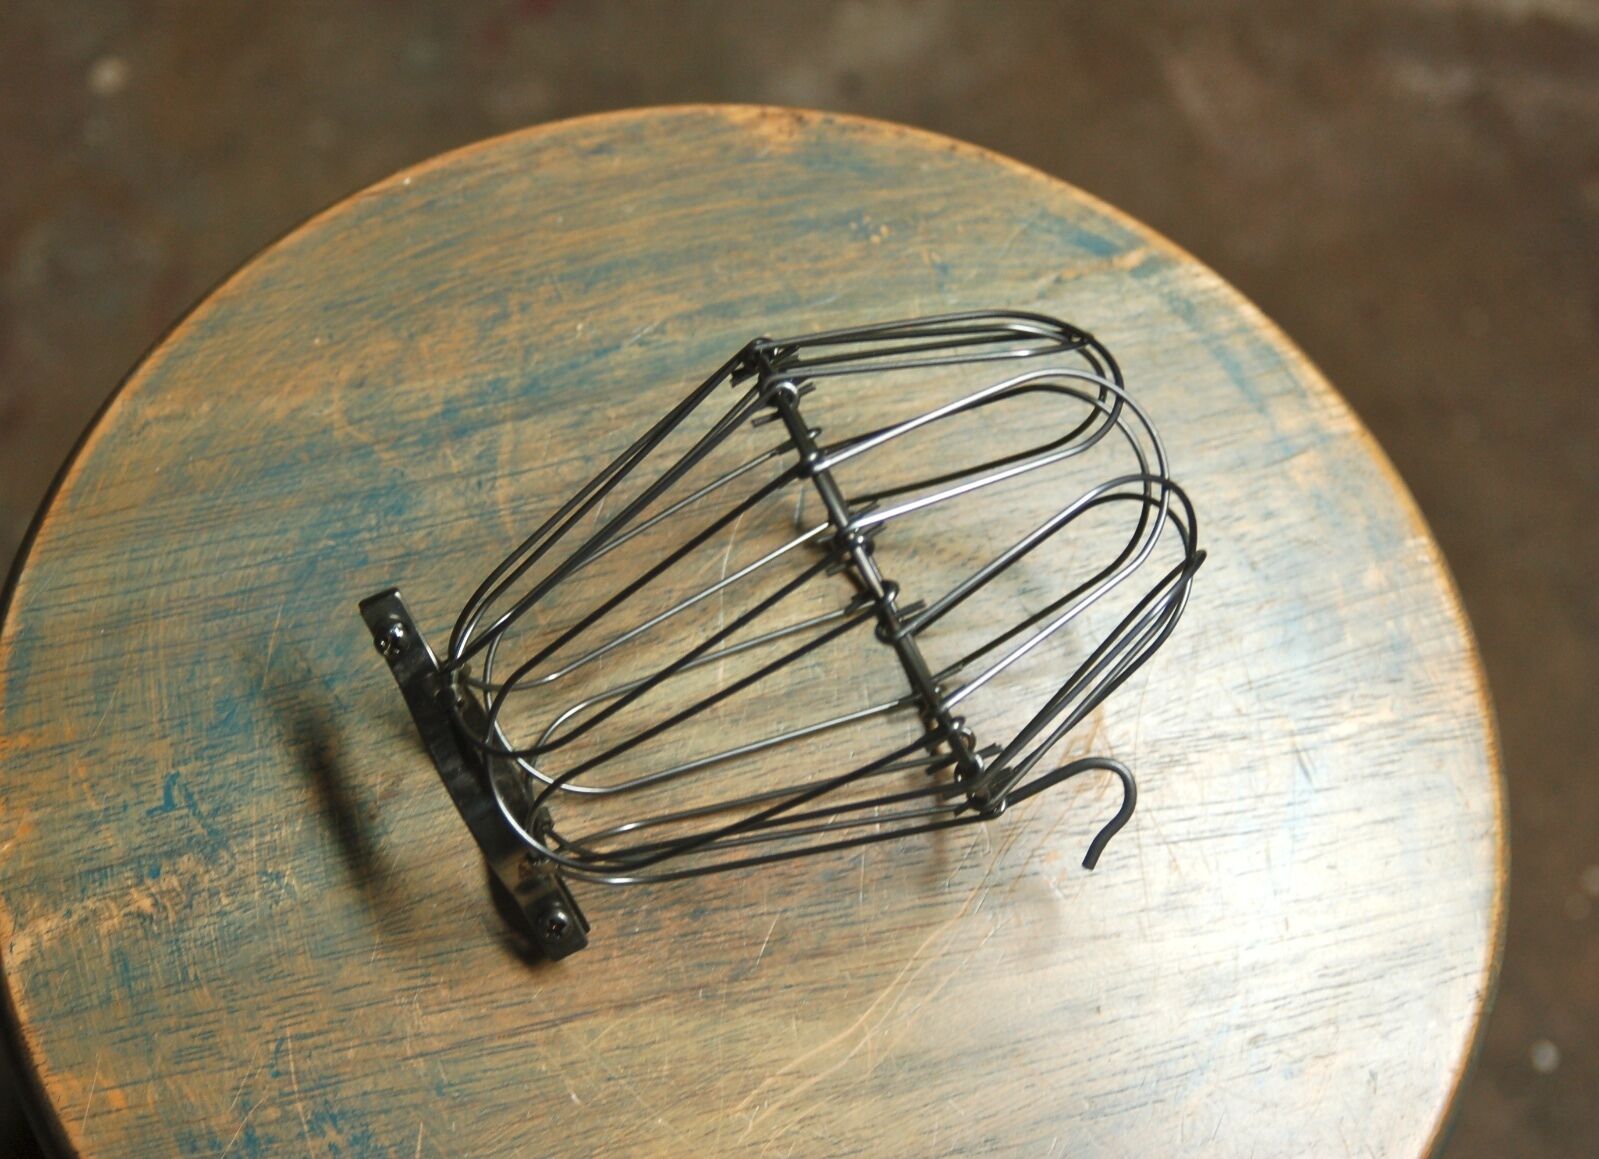 Steel Wire Bulb Cage - Clamp On Lamp Guard, Vintage Trouble Lights - Industrial 